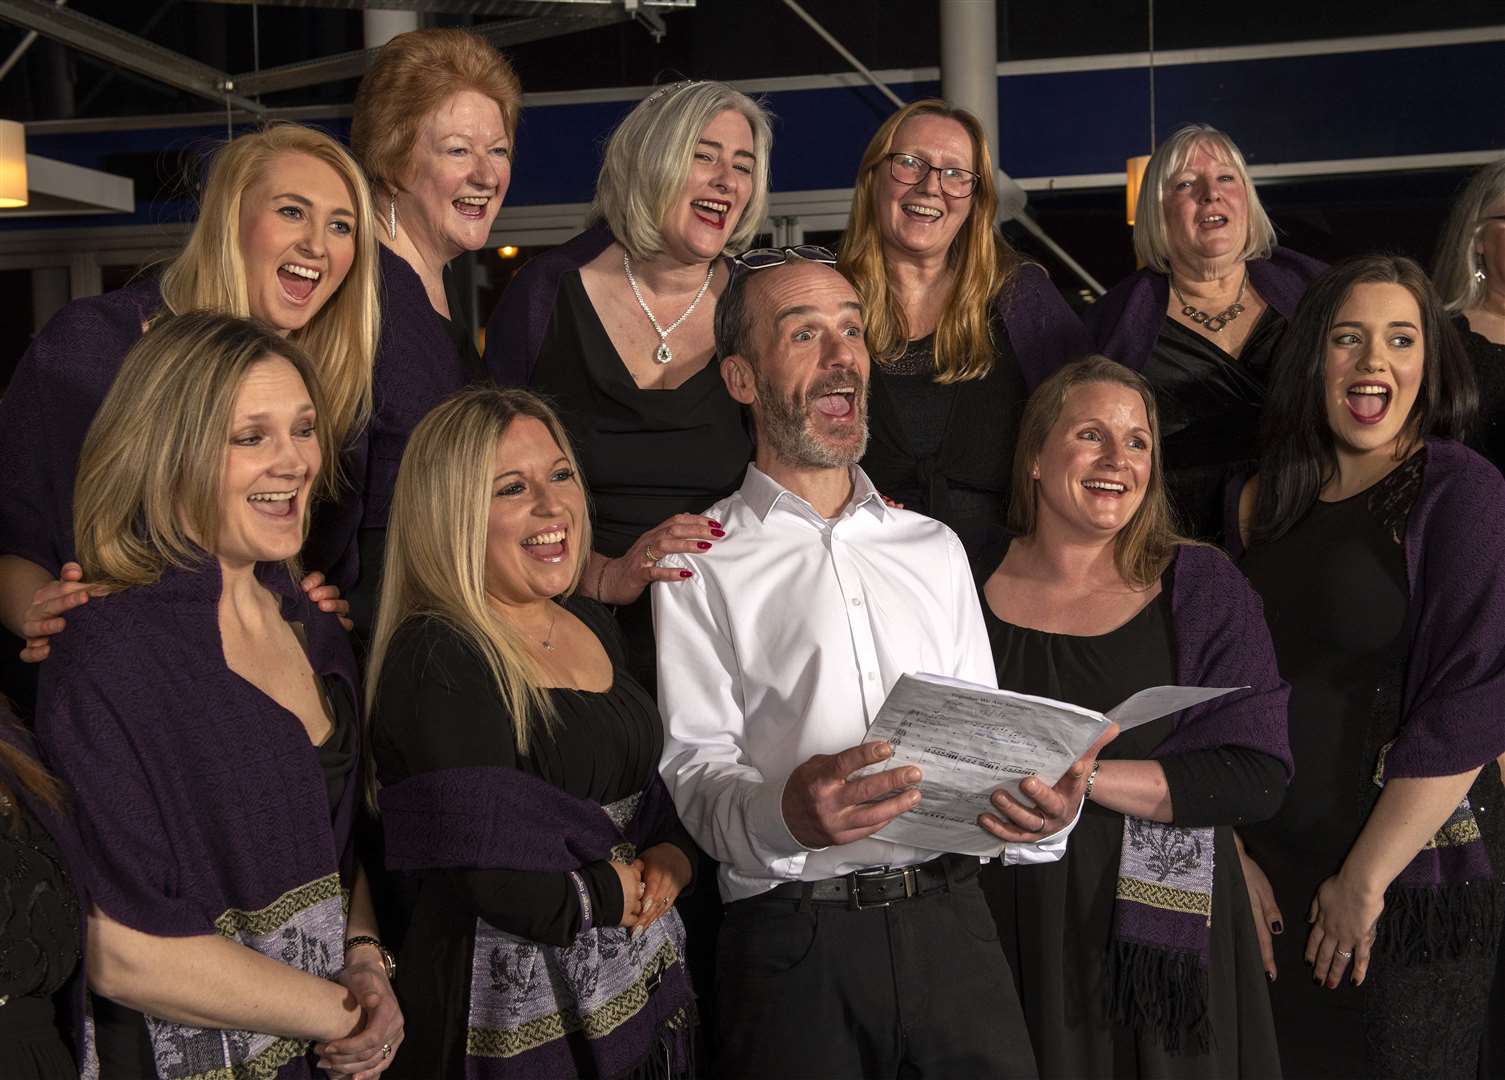 Barry Laird General Manager of Vue Inverness singing along with The Inverness Military Wives Choir.